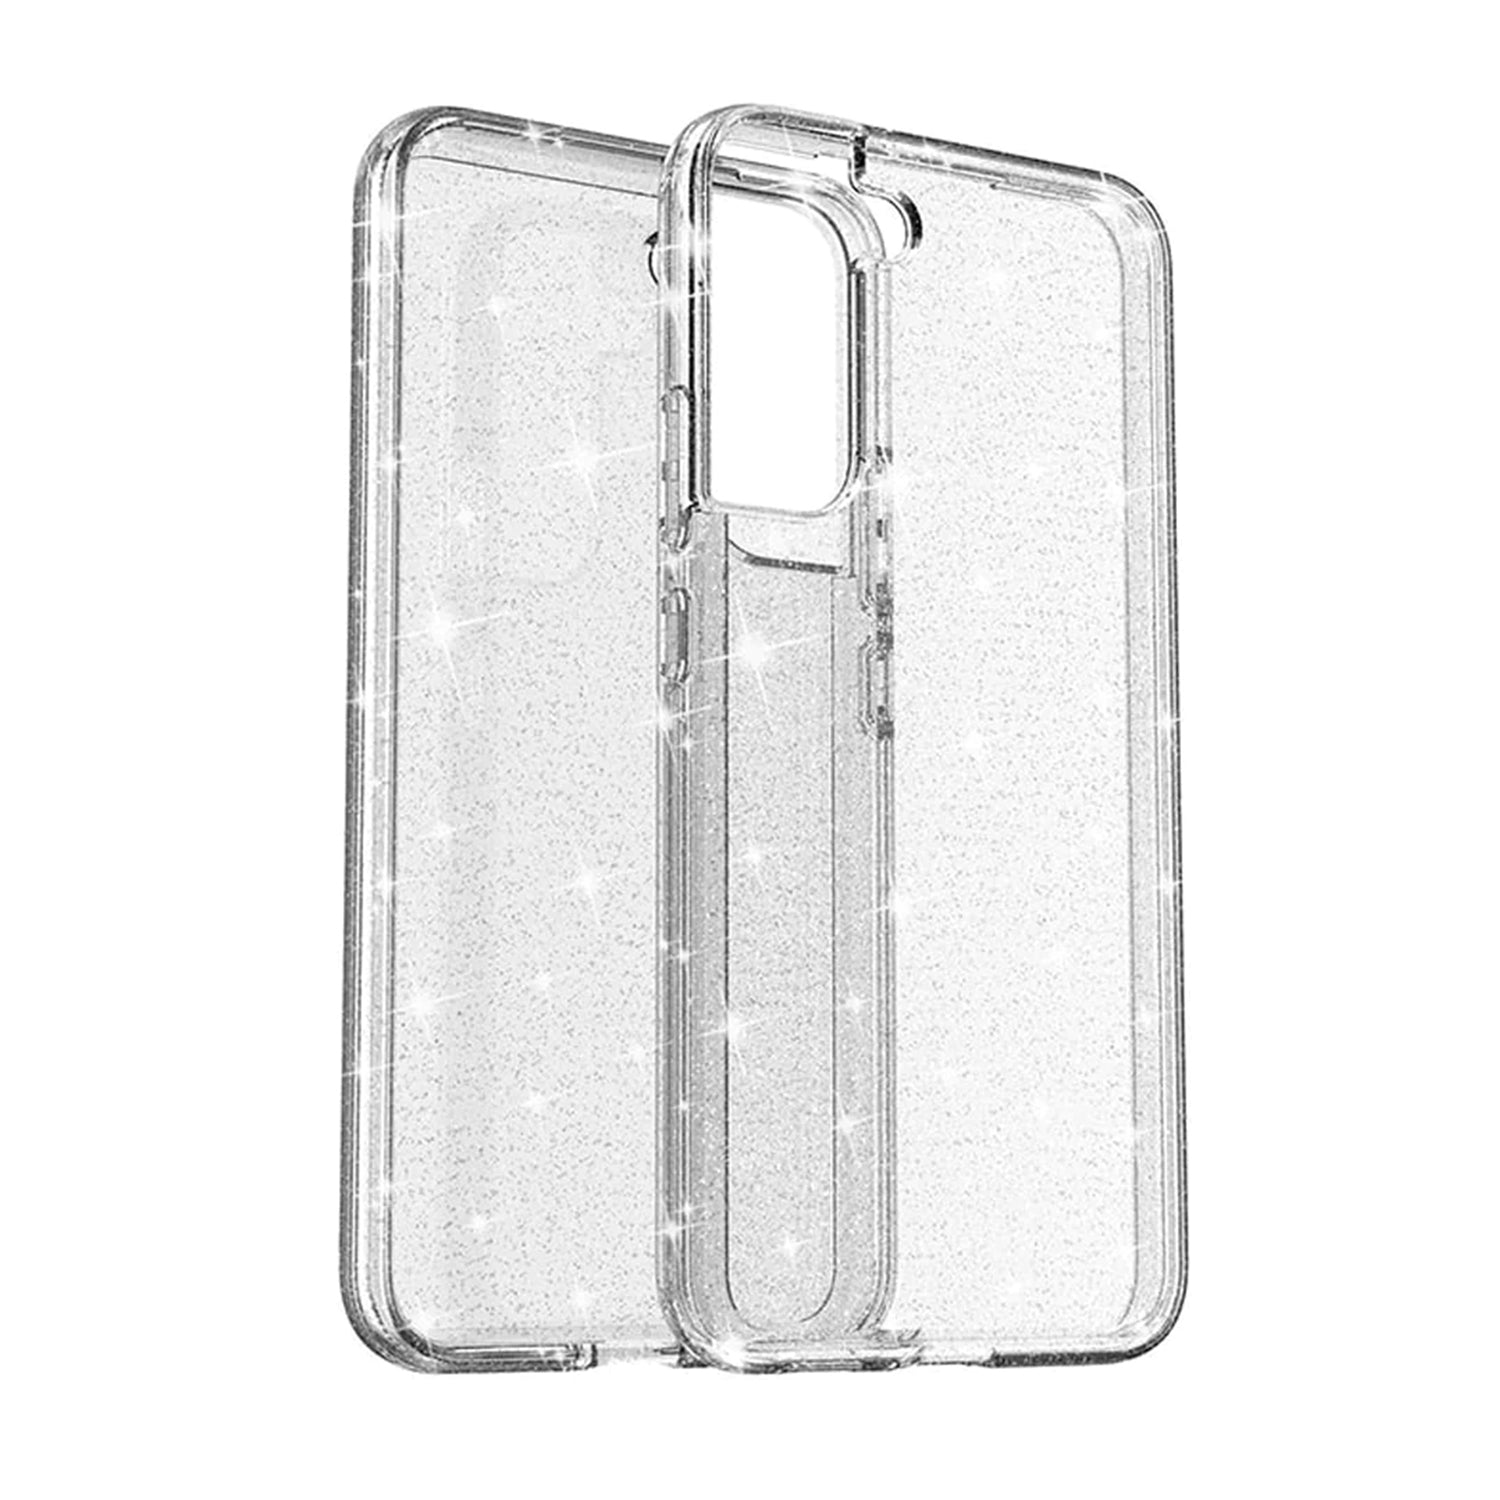 Shiny Transparency Phone Case for Samsung Galaxy S21 Plus